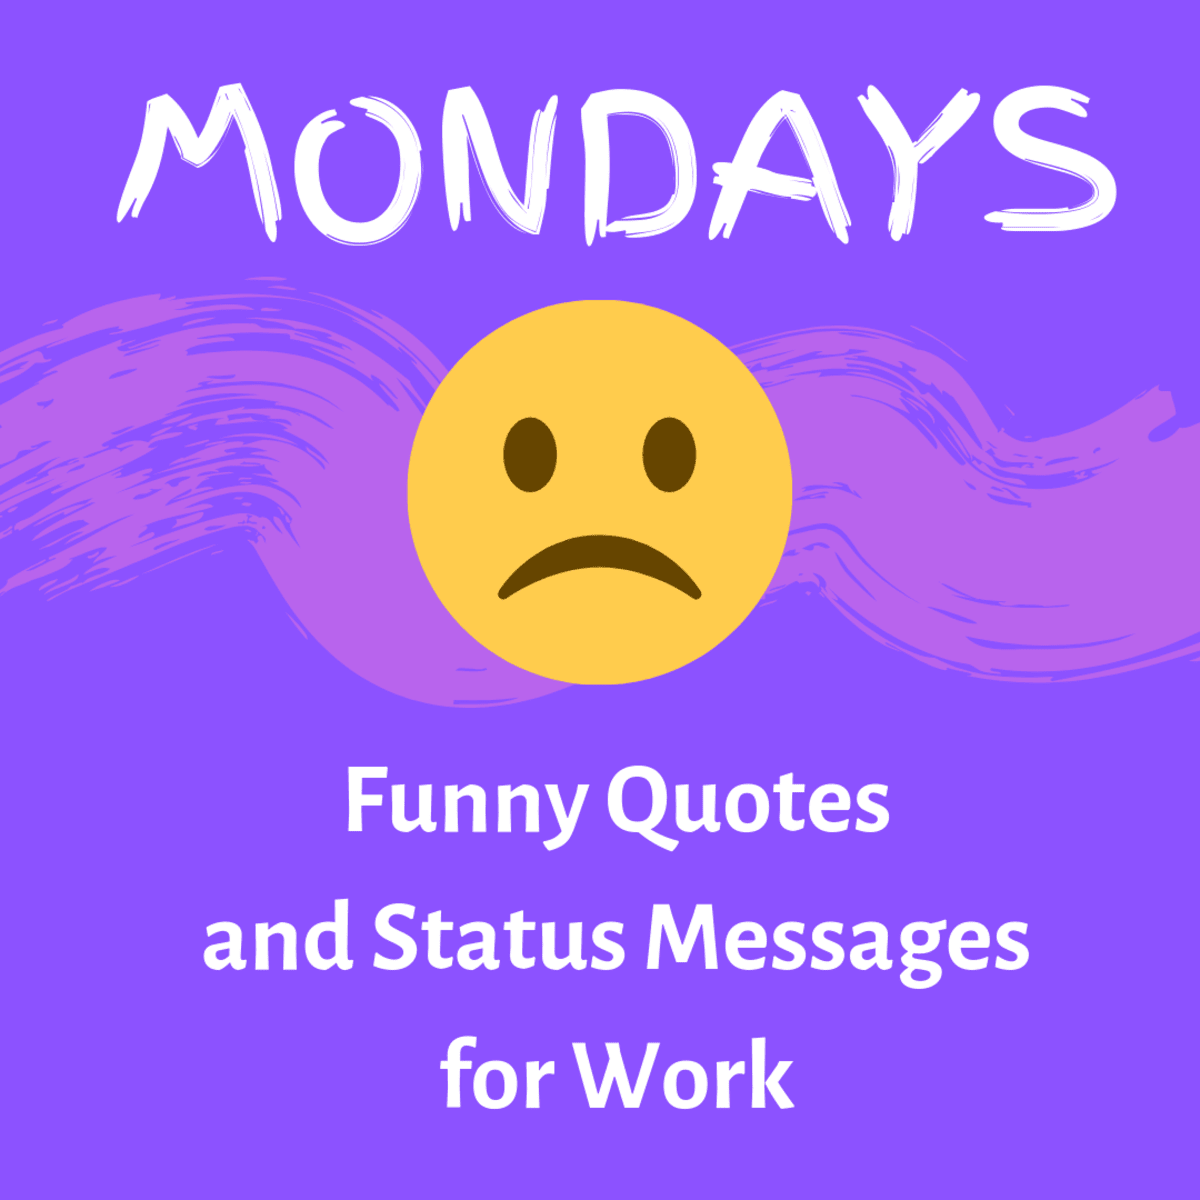 Funny Monday Quotes For Work Statuses And Pictures Holidappy Celebrations